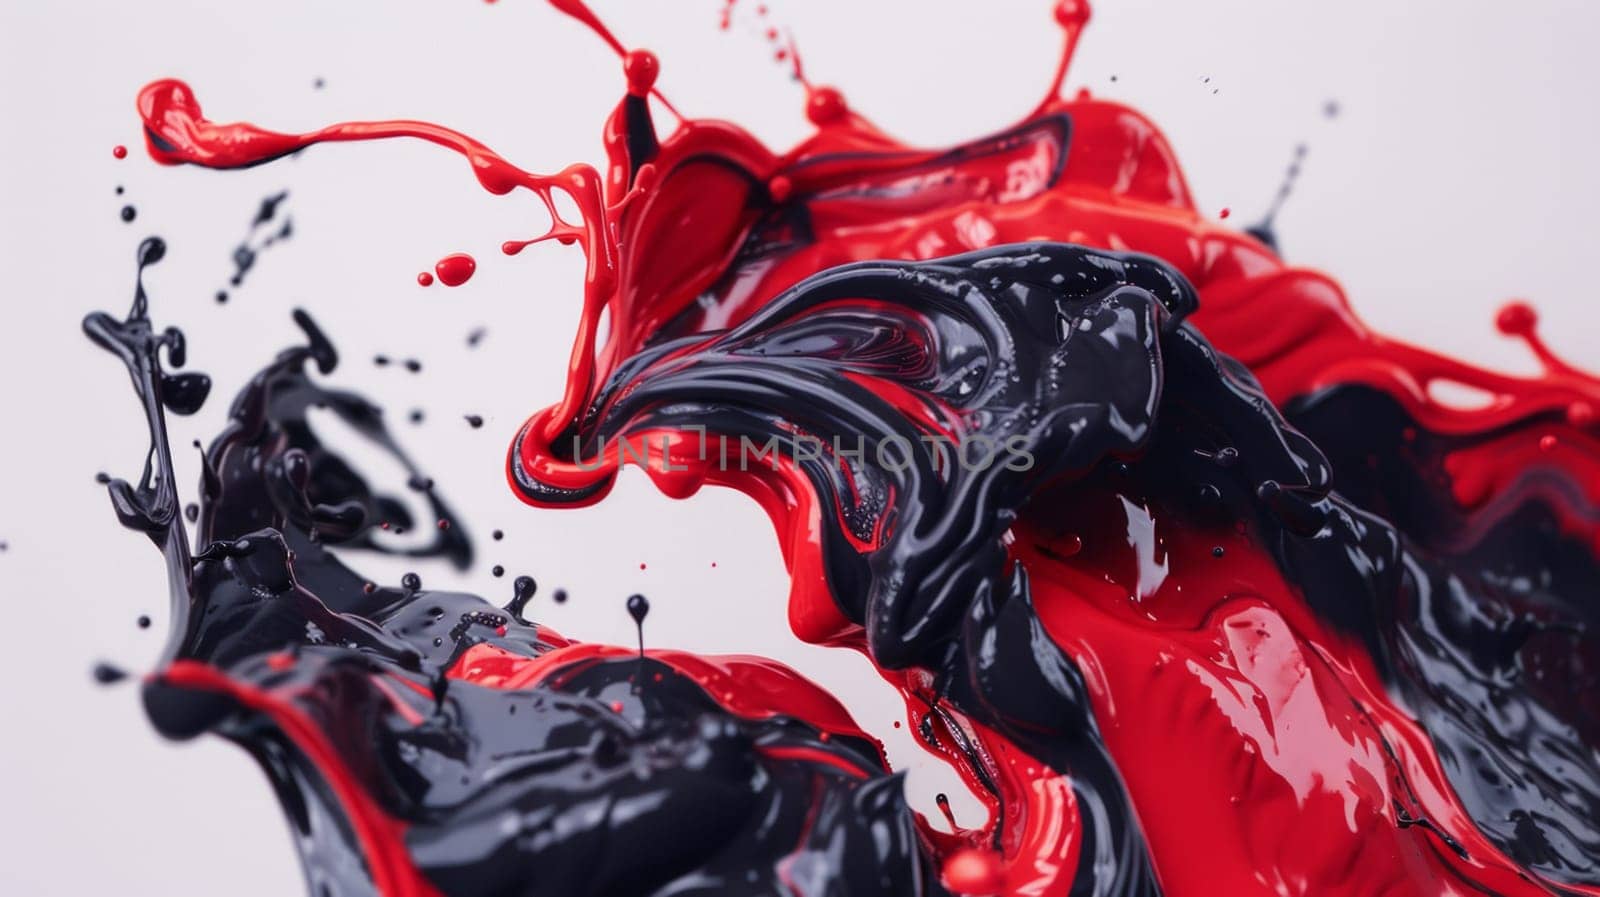 A dynamic collision between red and black liquids, with both splashing and merging in a mesmerizing display of color and movement by but_photo